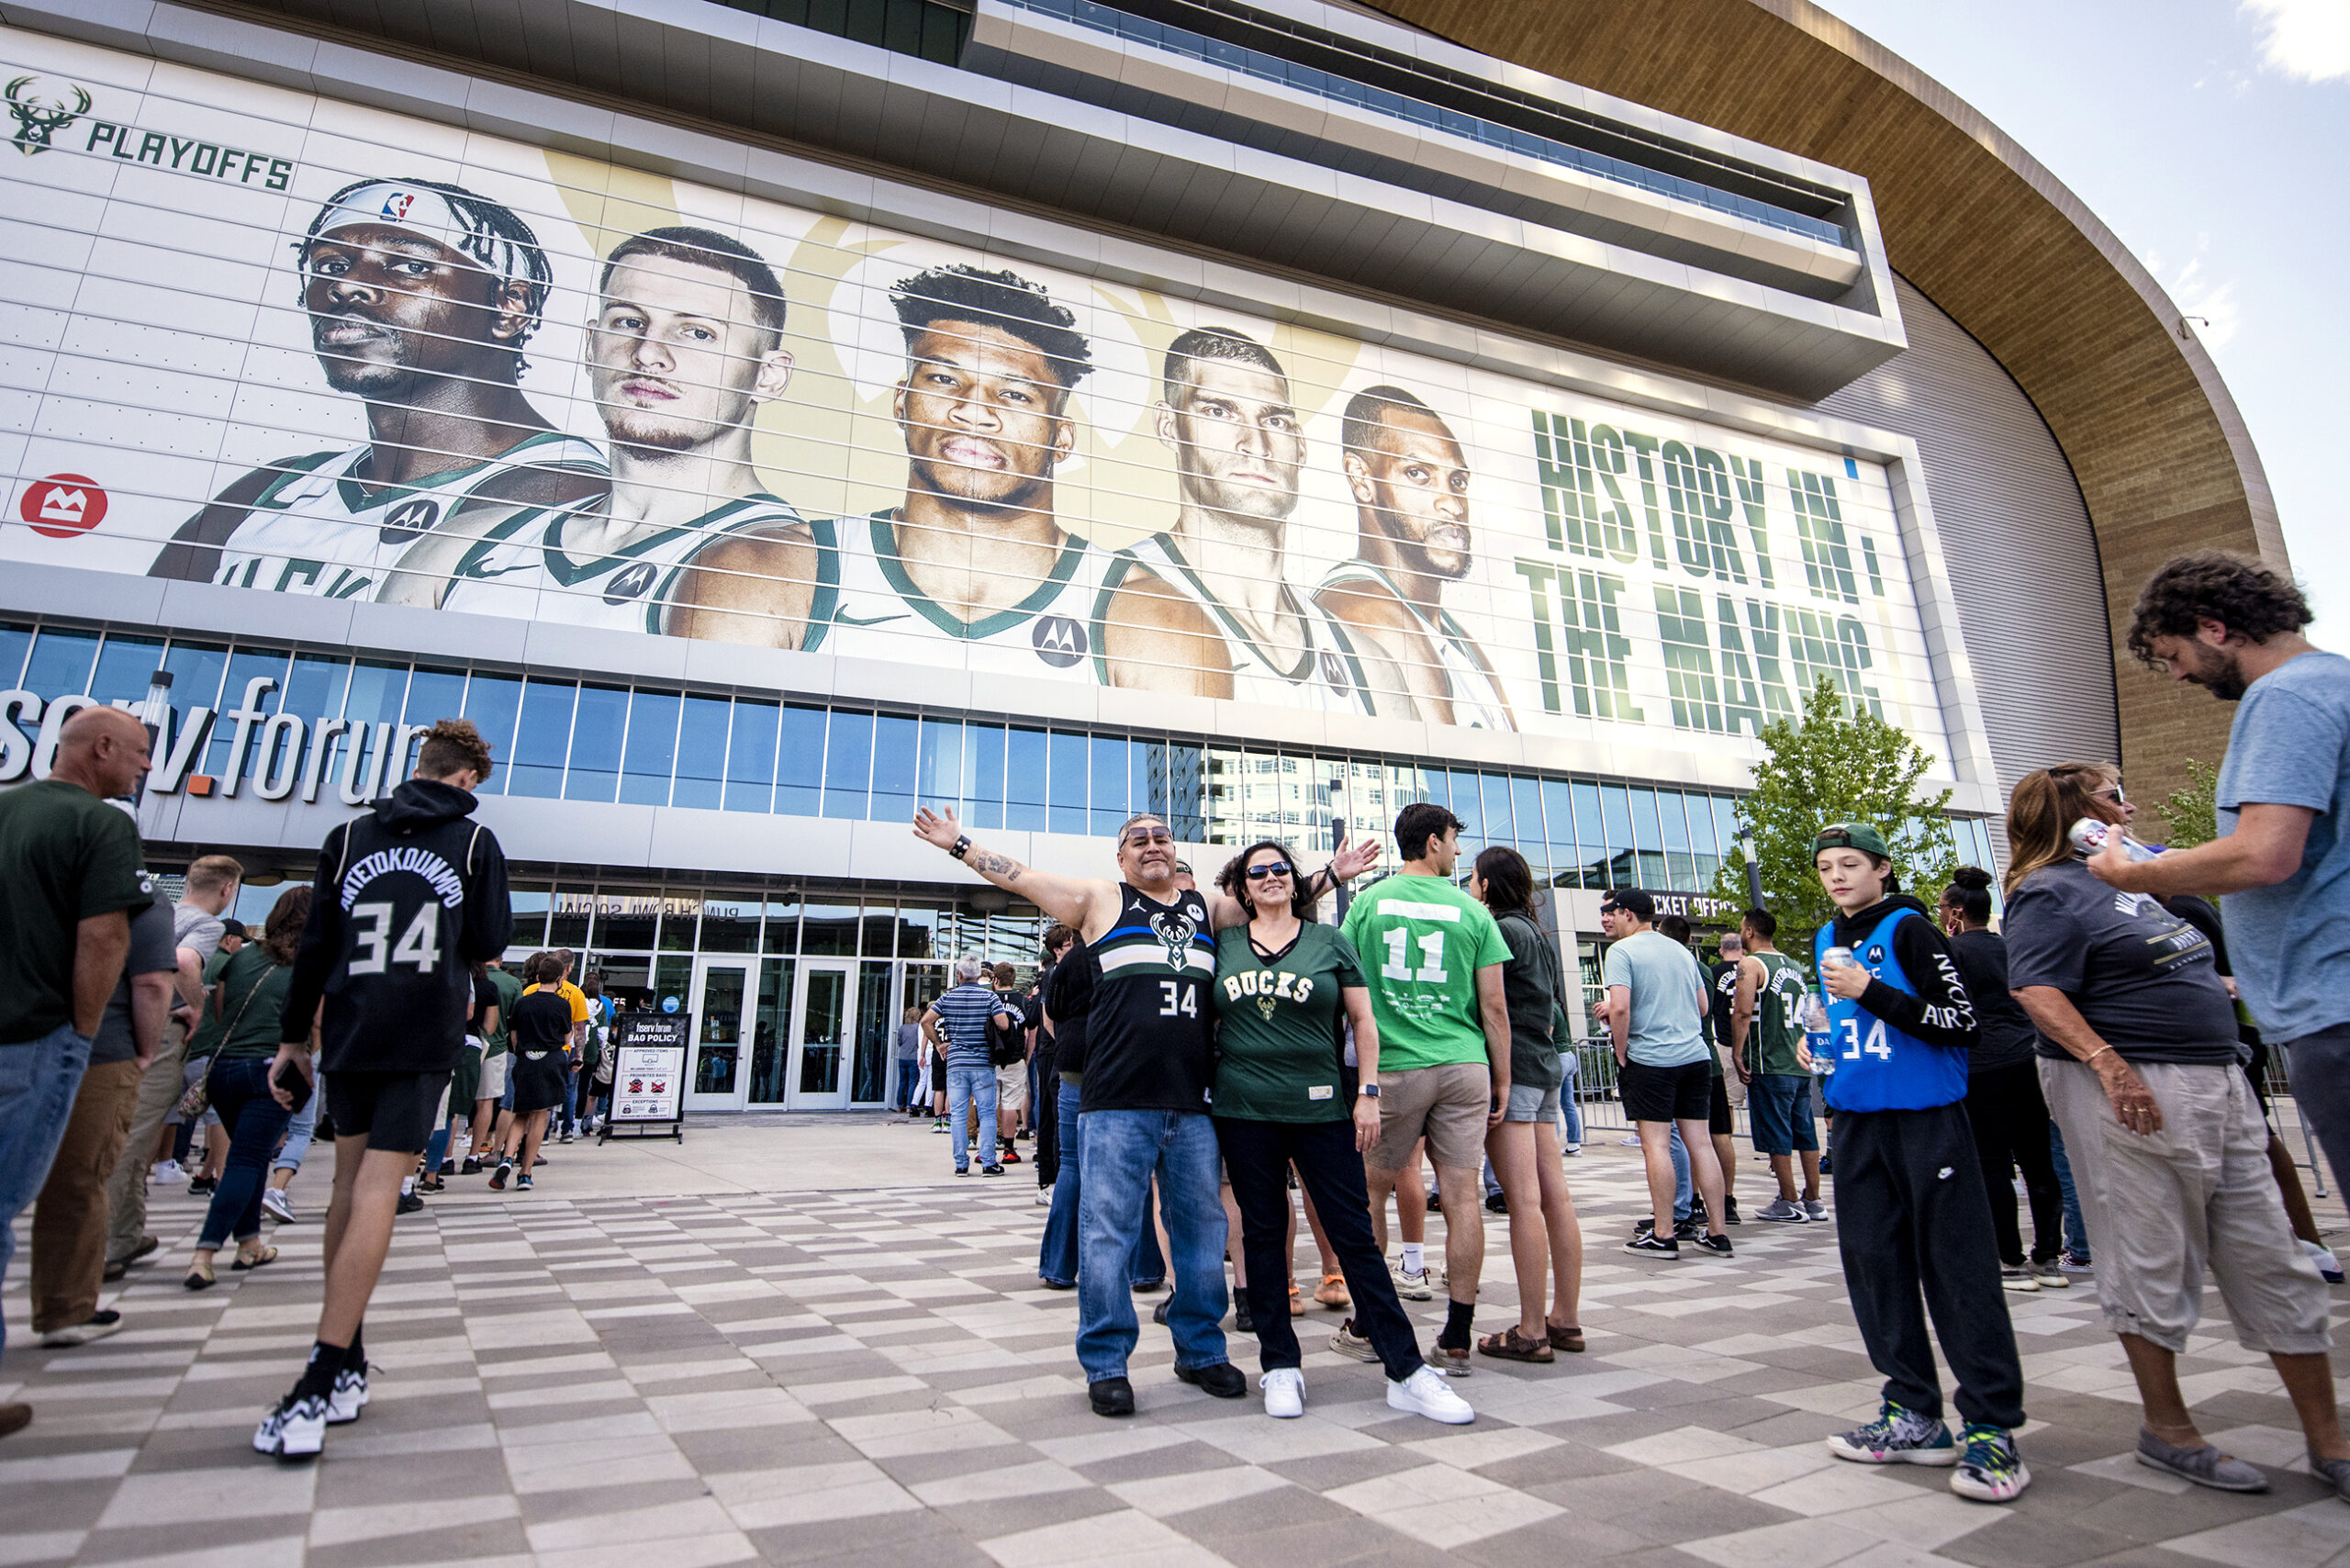 Fans raise their arms as they stand in front of the Fiserv Forum, which has large images of Milwaukee Bucks players on it.